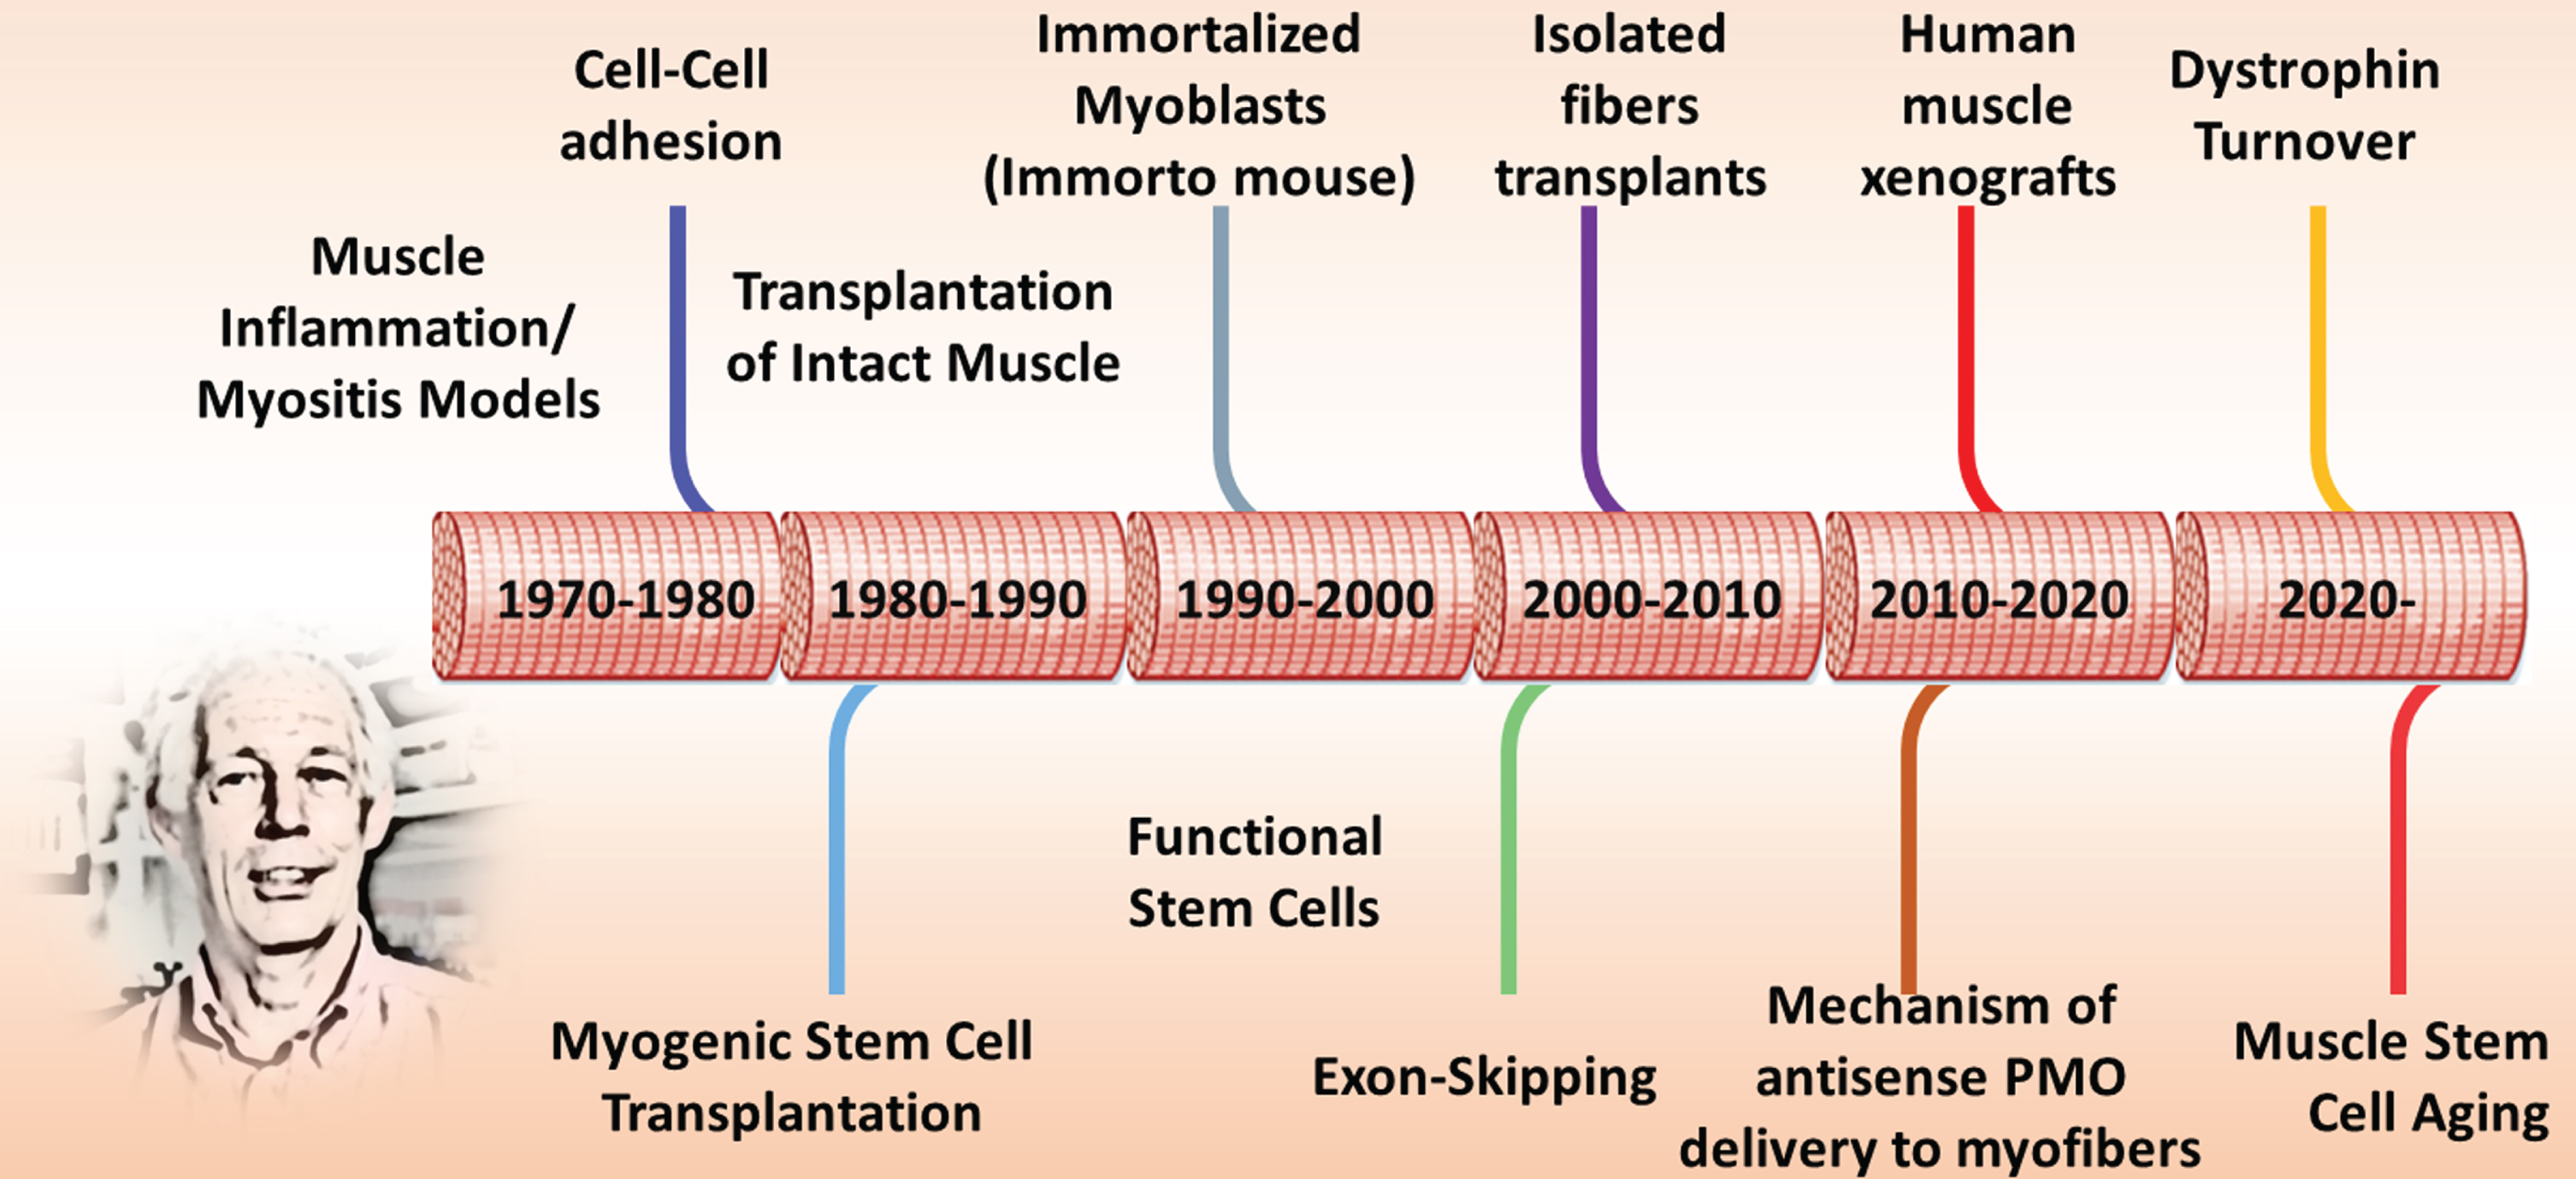 Timeline of Terry’s contributions to muscle biology. This timeline is a rough presentation of some of the technical and conceptual contributions Terry and his colleagues have made over the past 5 decades. Into the 6th decade, Terry continues to tackle new questions relevant to DMD therapy and muscle biology.